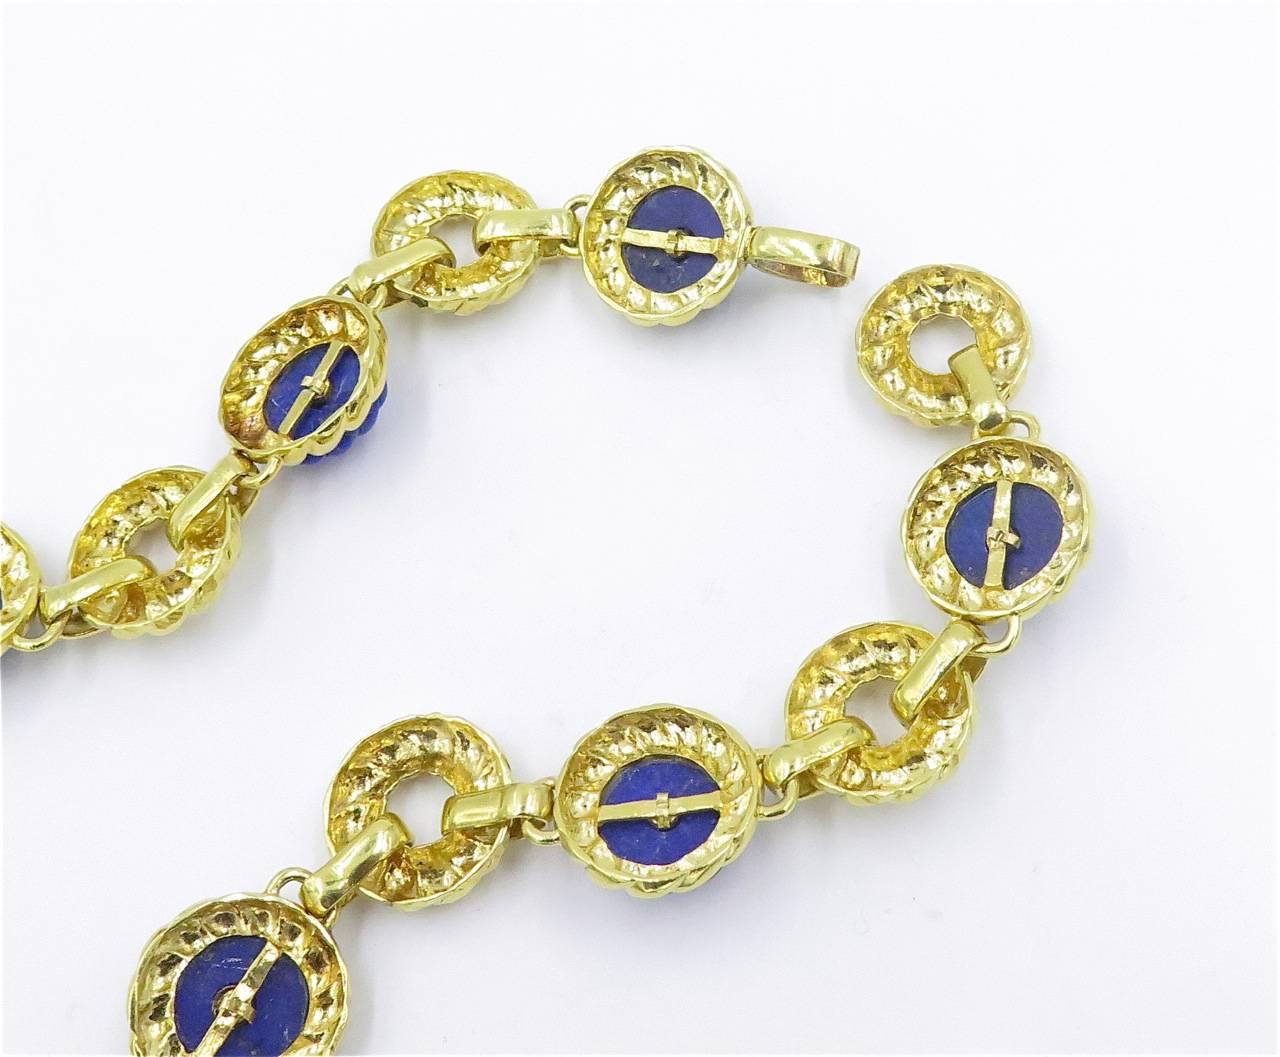 An 18 karat yellow gold and lapis lazuli necklace and matching earrings.  Trio.  Circa 1970. The necklace is designed as a long chain, comprised of hammered gold circular links, spaced by carved lapis lazuli floret plaques, each centering a gold